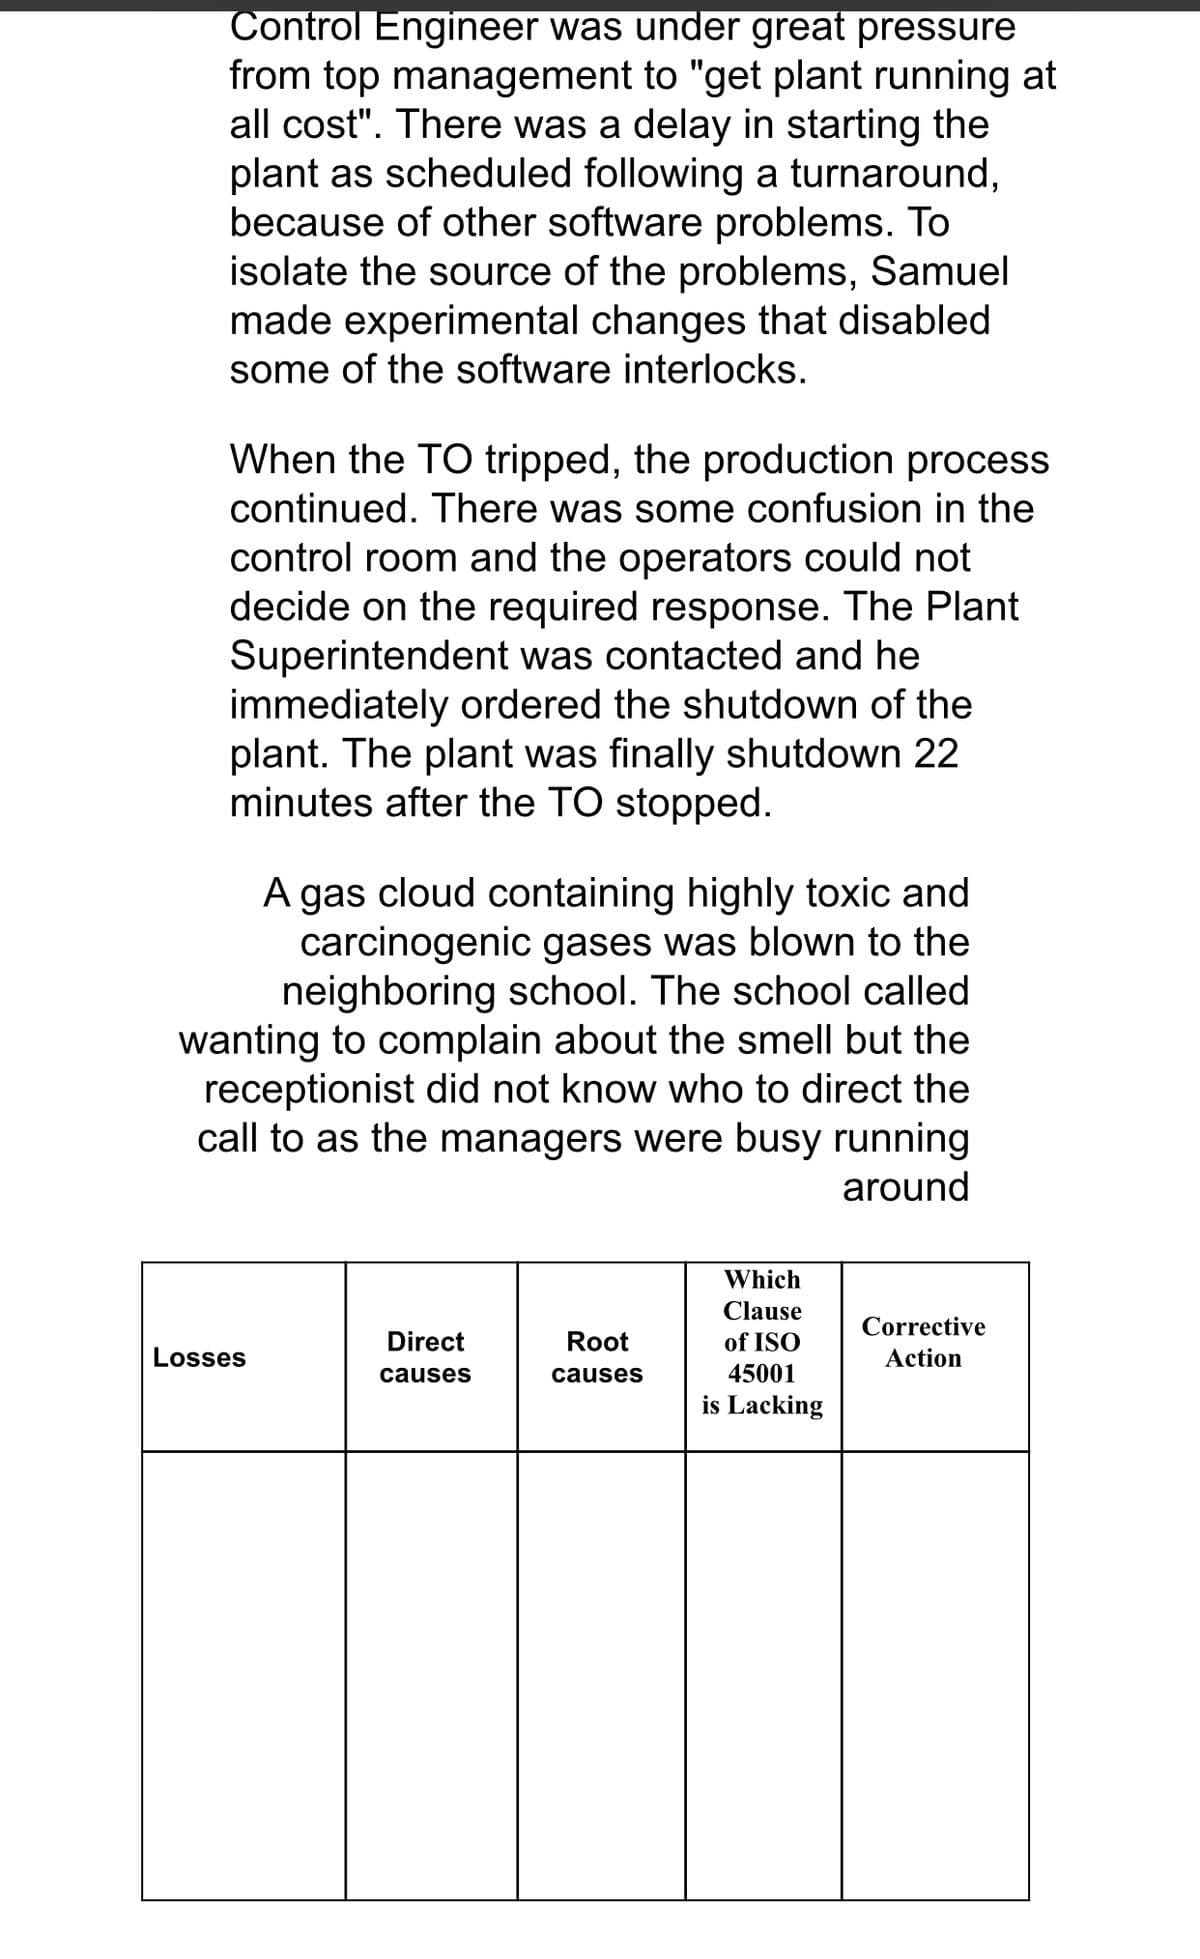 Control Engineer was under great pressure
from top management to "get plant running at
all cost". There was a delay in starting the
plant as scheduled following a turnaround,
because of other software problems. To
isolate the source of the problems, Samuel
made experimental changes that disabled
some of the software interlocks.
When the TO tripped, the production process
continued. There was some confusion in the
control room and the operators could not
decide on the required response. The Plant
Superintendent was contacted and he
immediately ordered the shutdown of the
plant. The plant was finally shutdown 22
minutes after the TO stopped.
A gas cloud containing highly toxic and
carcinogenic gases was blown to the
neighboring school. The school called
wanting to complain about the smell but the
receptionist did not know who to direct the
call to as the managers were busy running
around
Which
Clause
Corrective
Direct
Root
of ISO
Losses
Action
causes
causes
45001
is Lacking
